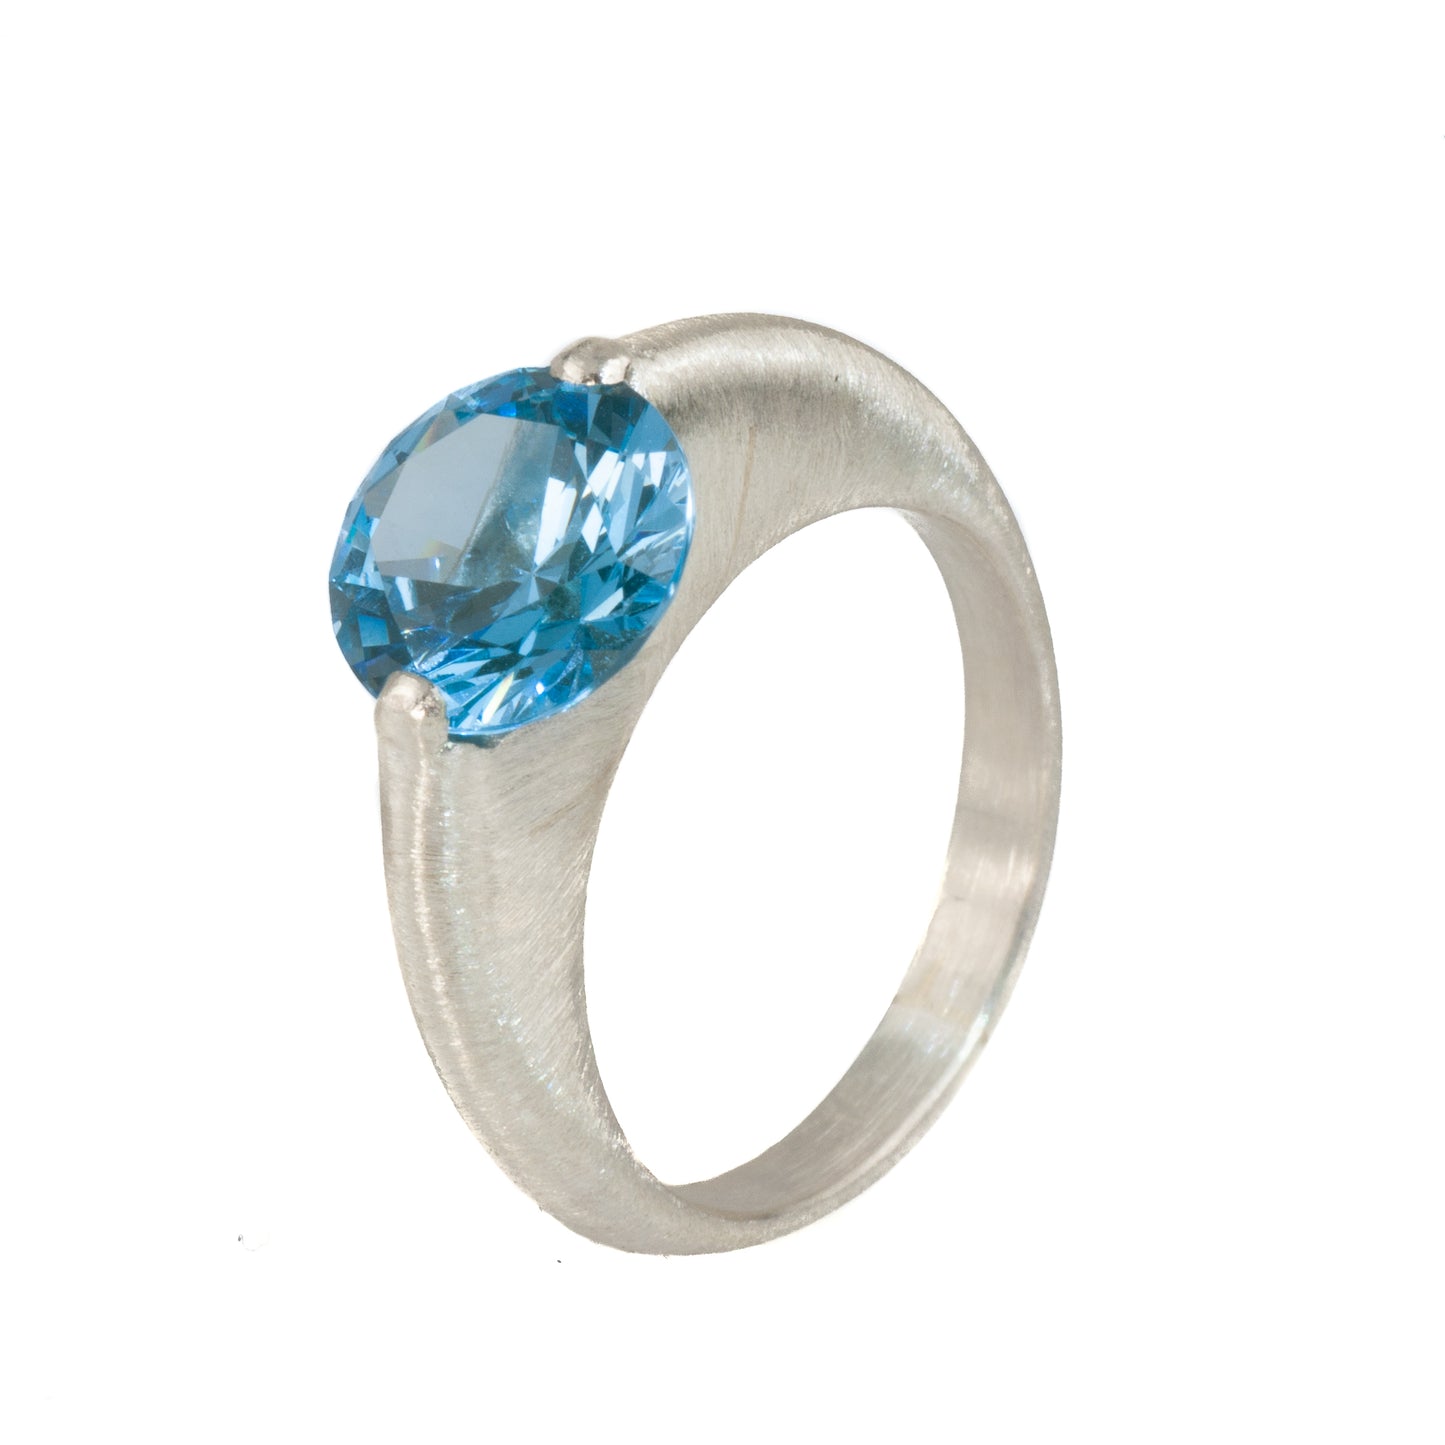 Mysterium Collection Textured Swiss Blue Synthetic Spinel Ring